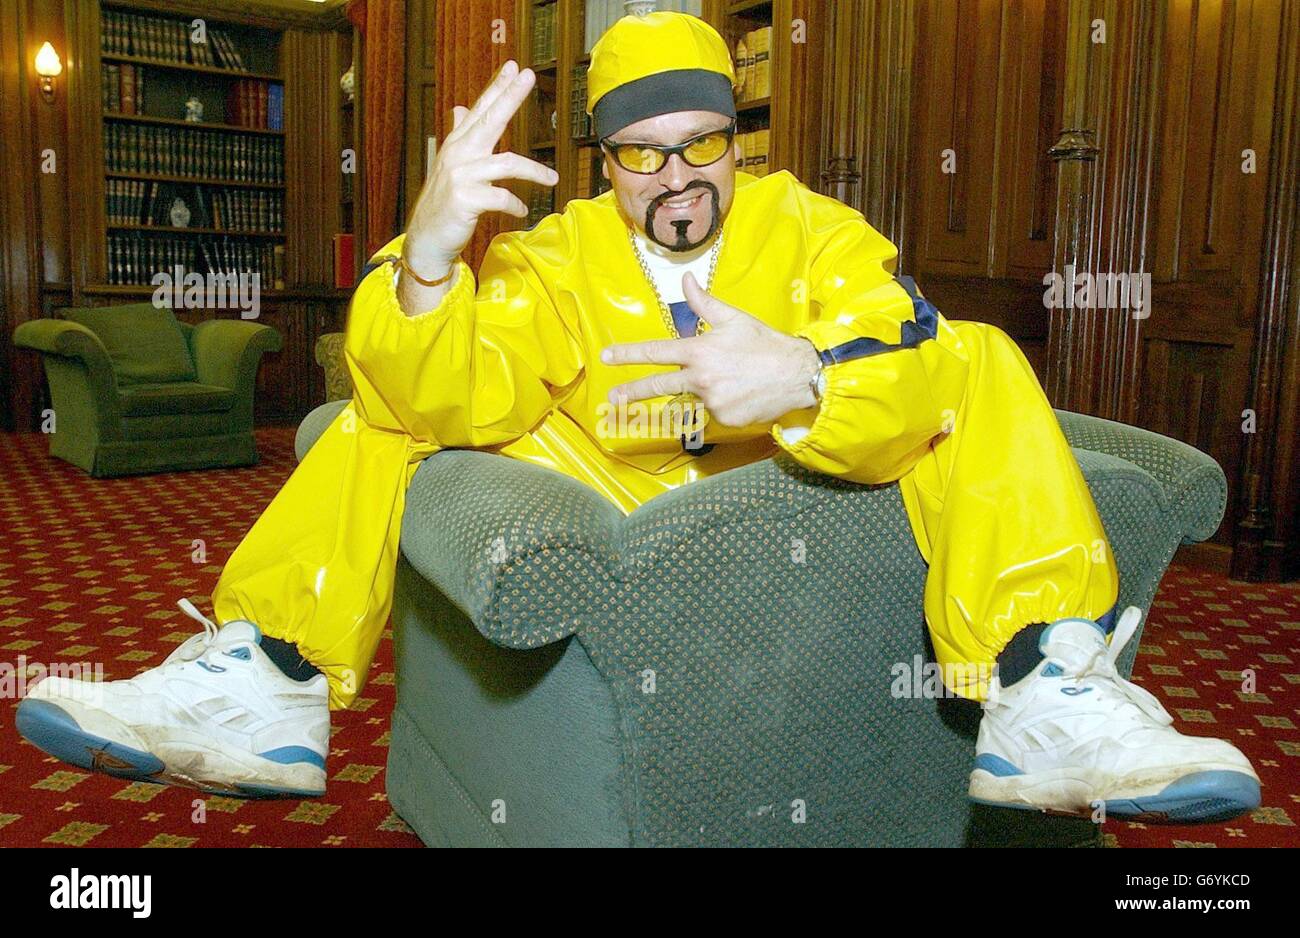 Conservative MP Alan Duncan in the guise of comedian 'Ali G'. Duncan chose his costume before attended a 'balloon debate' with five other MP's, at Latimer House in Buckinghamshire during a Conservative Party away day, an opportunity for MPs to meet for 24 hours of discussion and briefings in the run-up to the June elections. Stock Photo